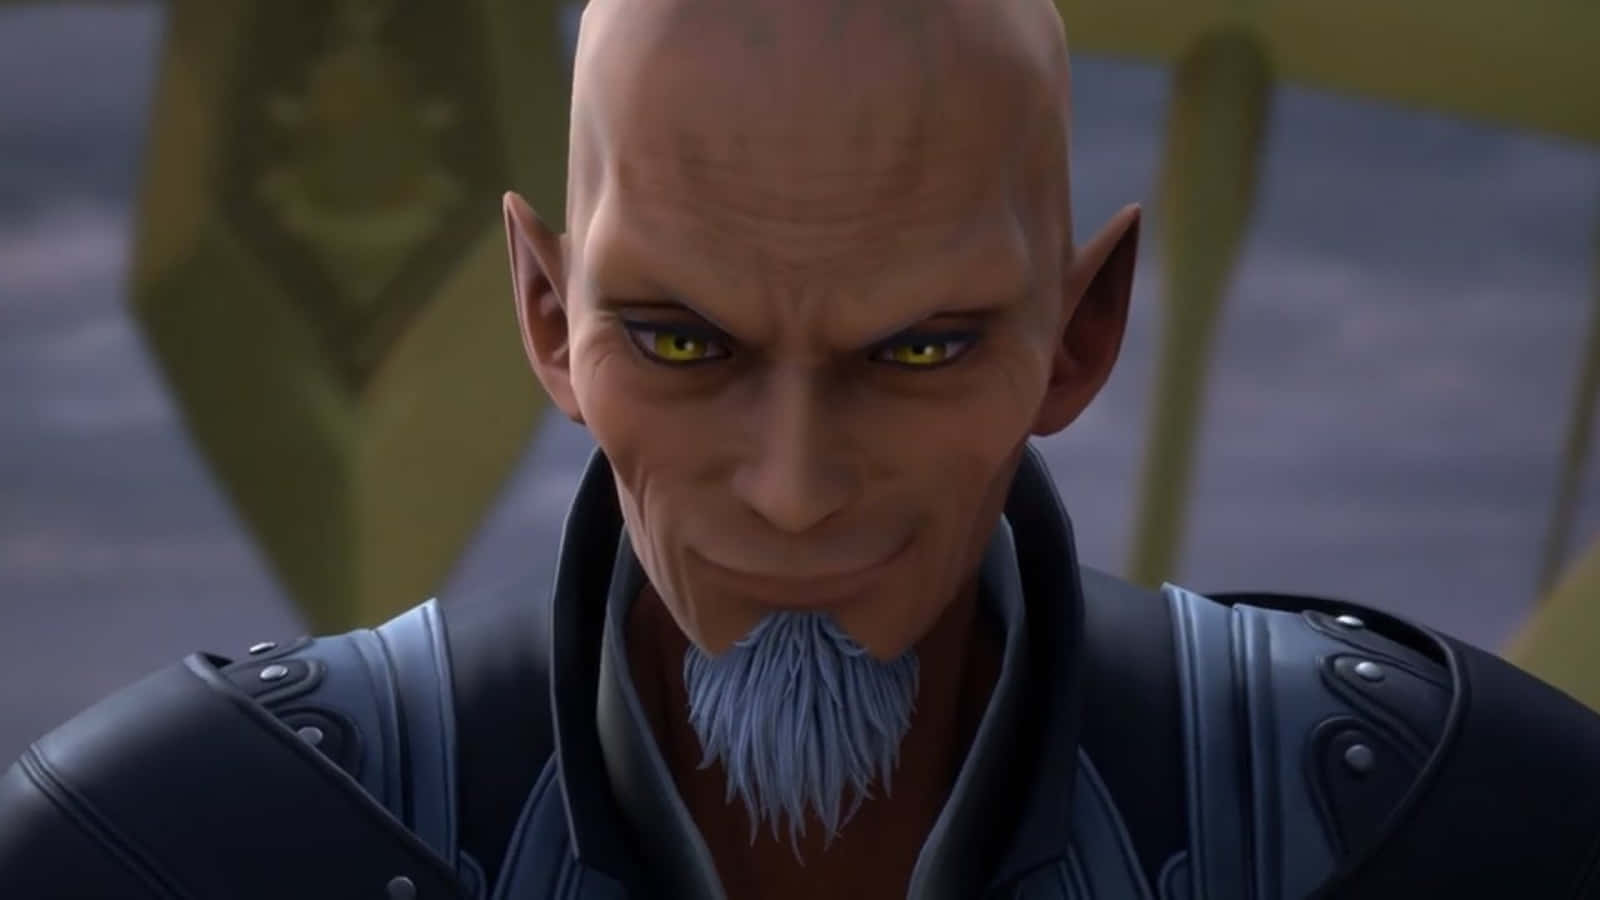 Master Xehanort, the powerful antagonist in Kingdom Hearts Wallpaper